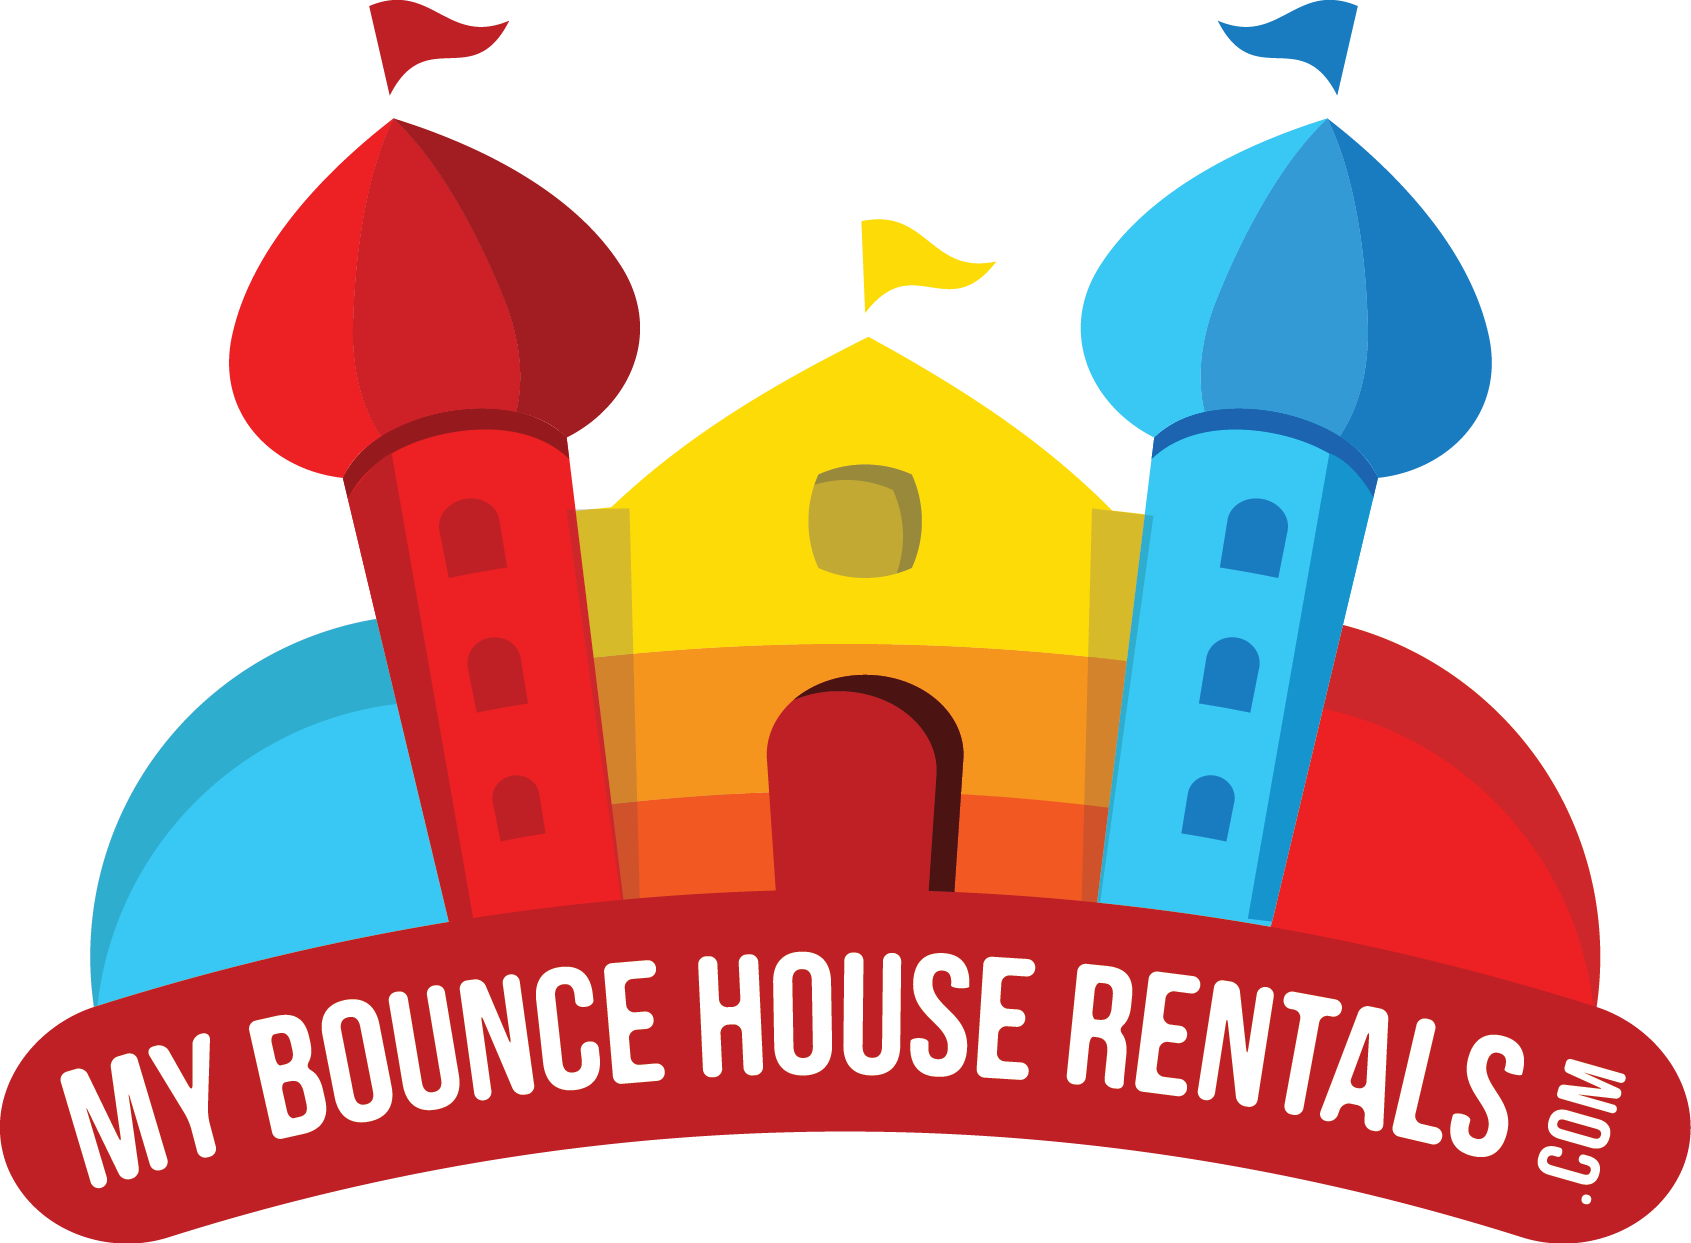 My bounce house rentals of Montgomery's Logo